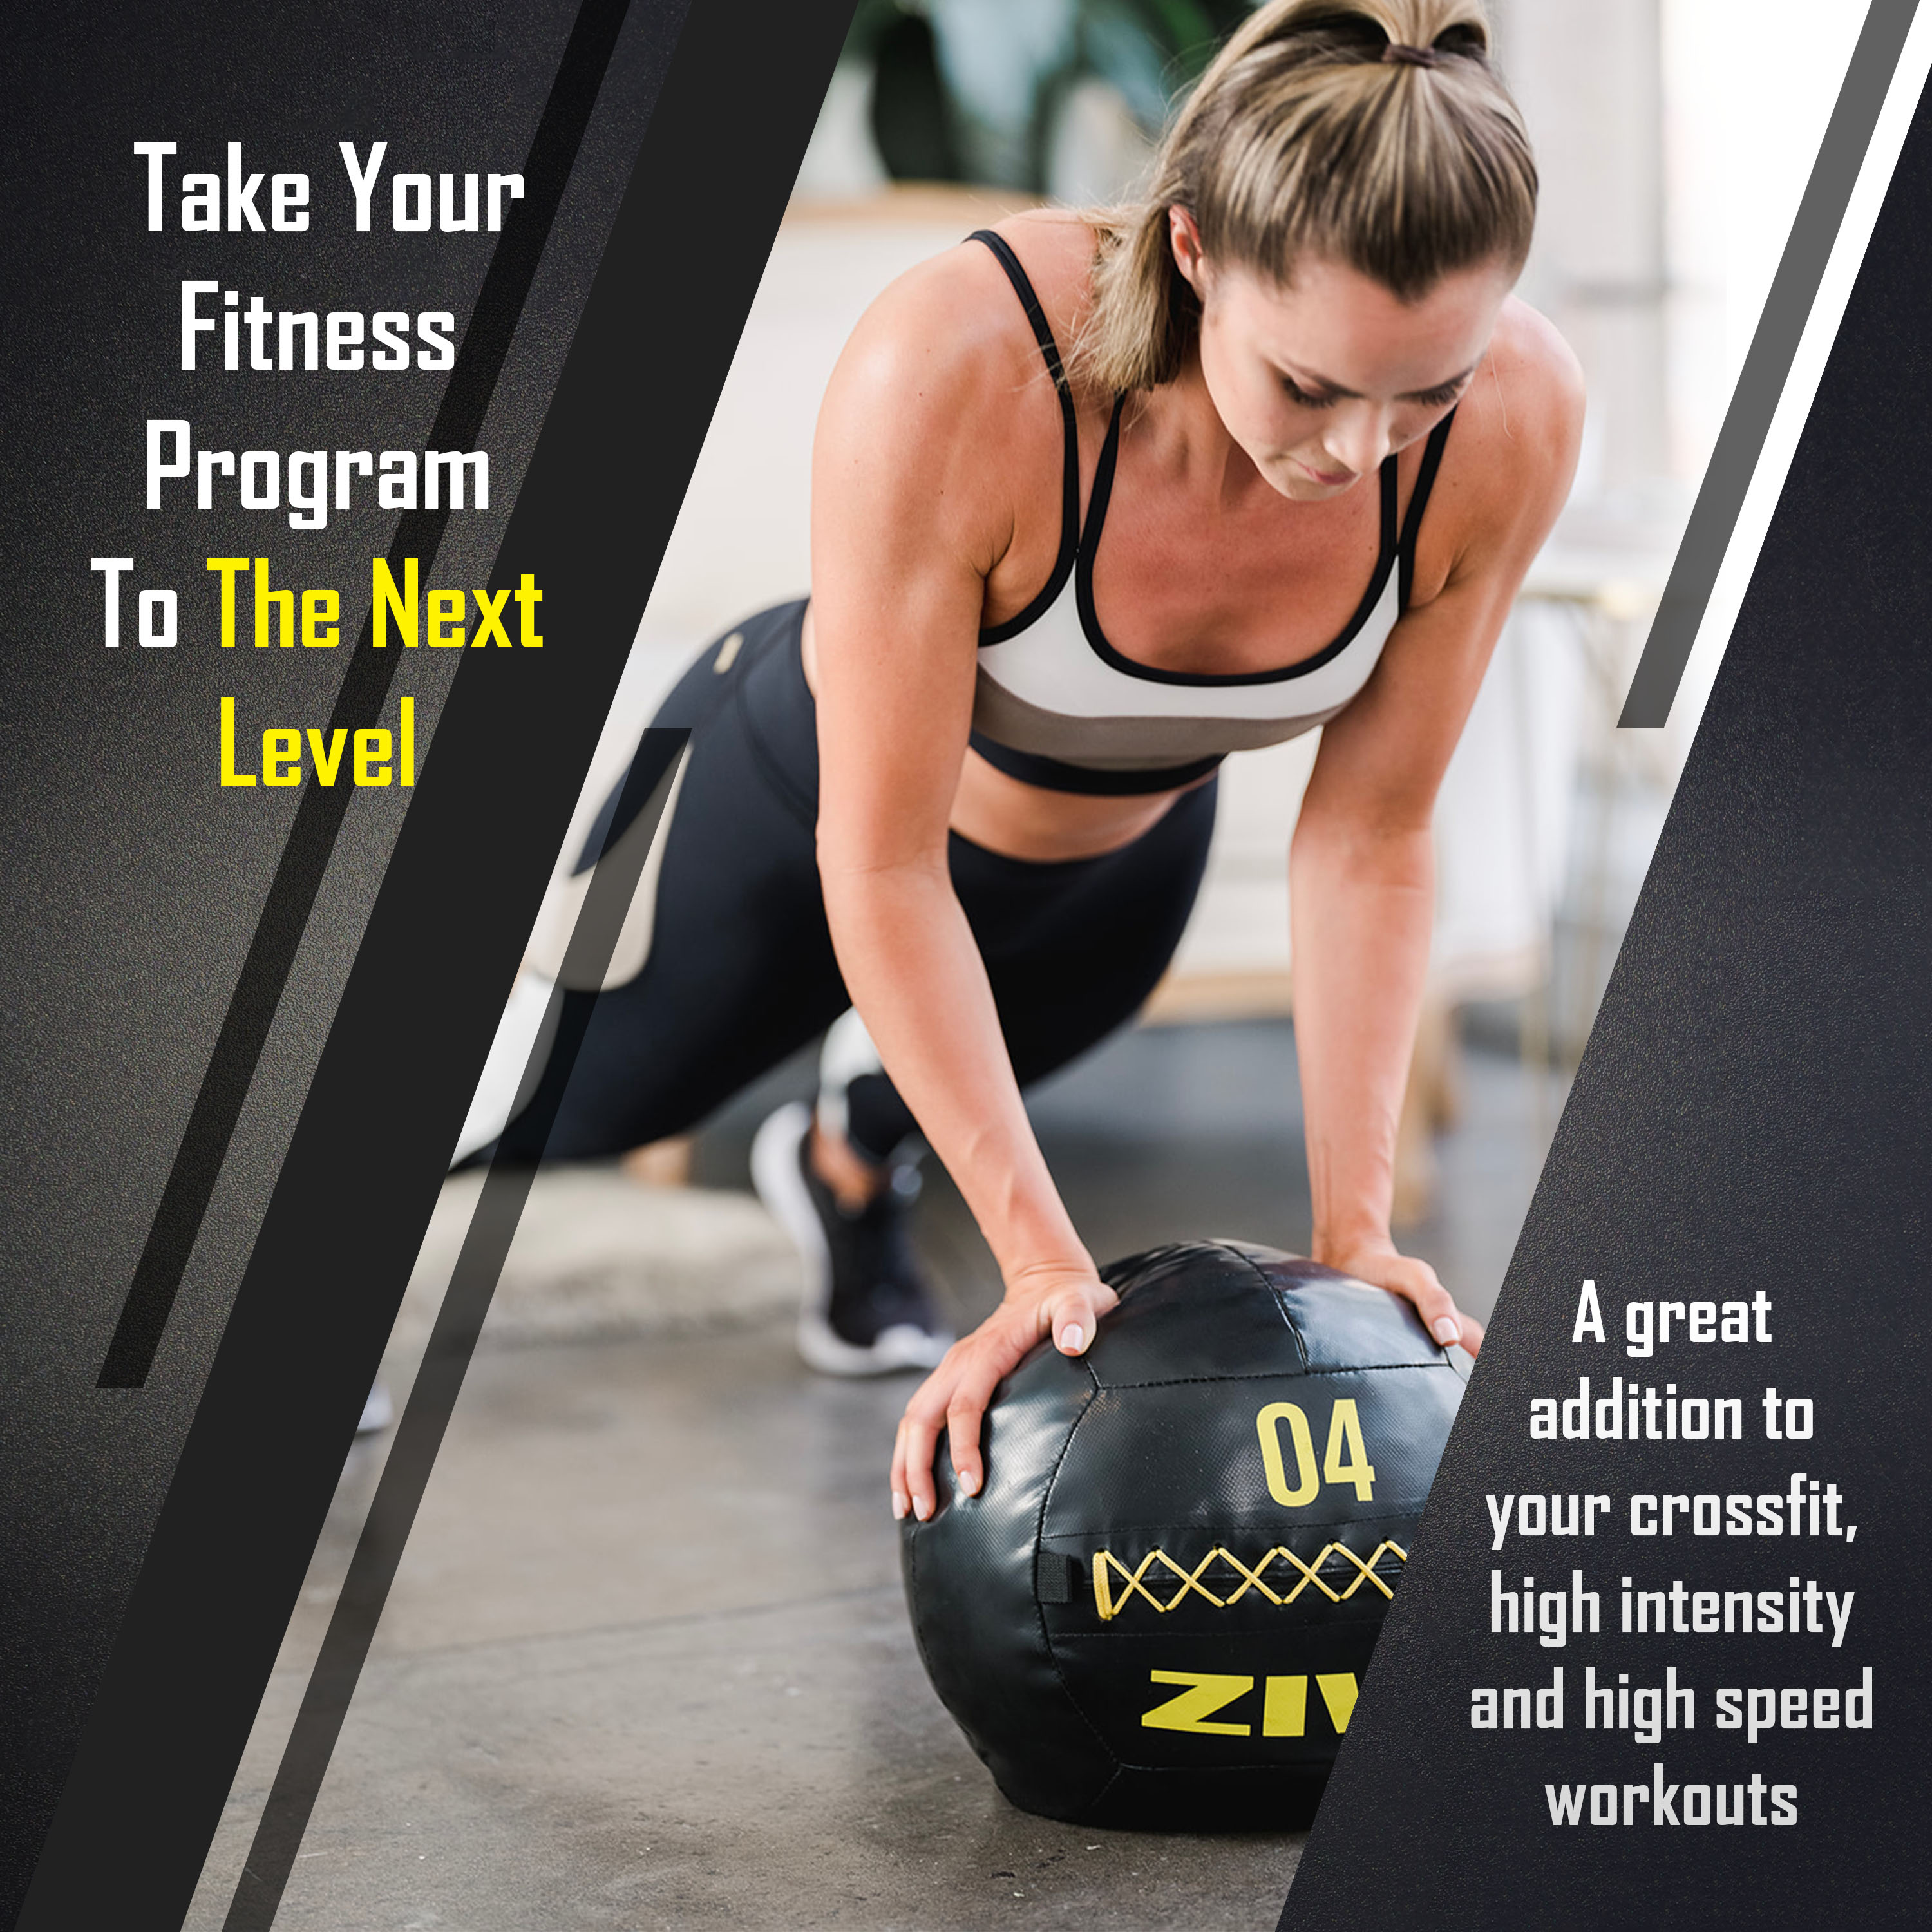 Take your fitness program to the next level. A great addition to your crossfit, high intensity and high speed workouts.